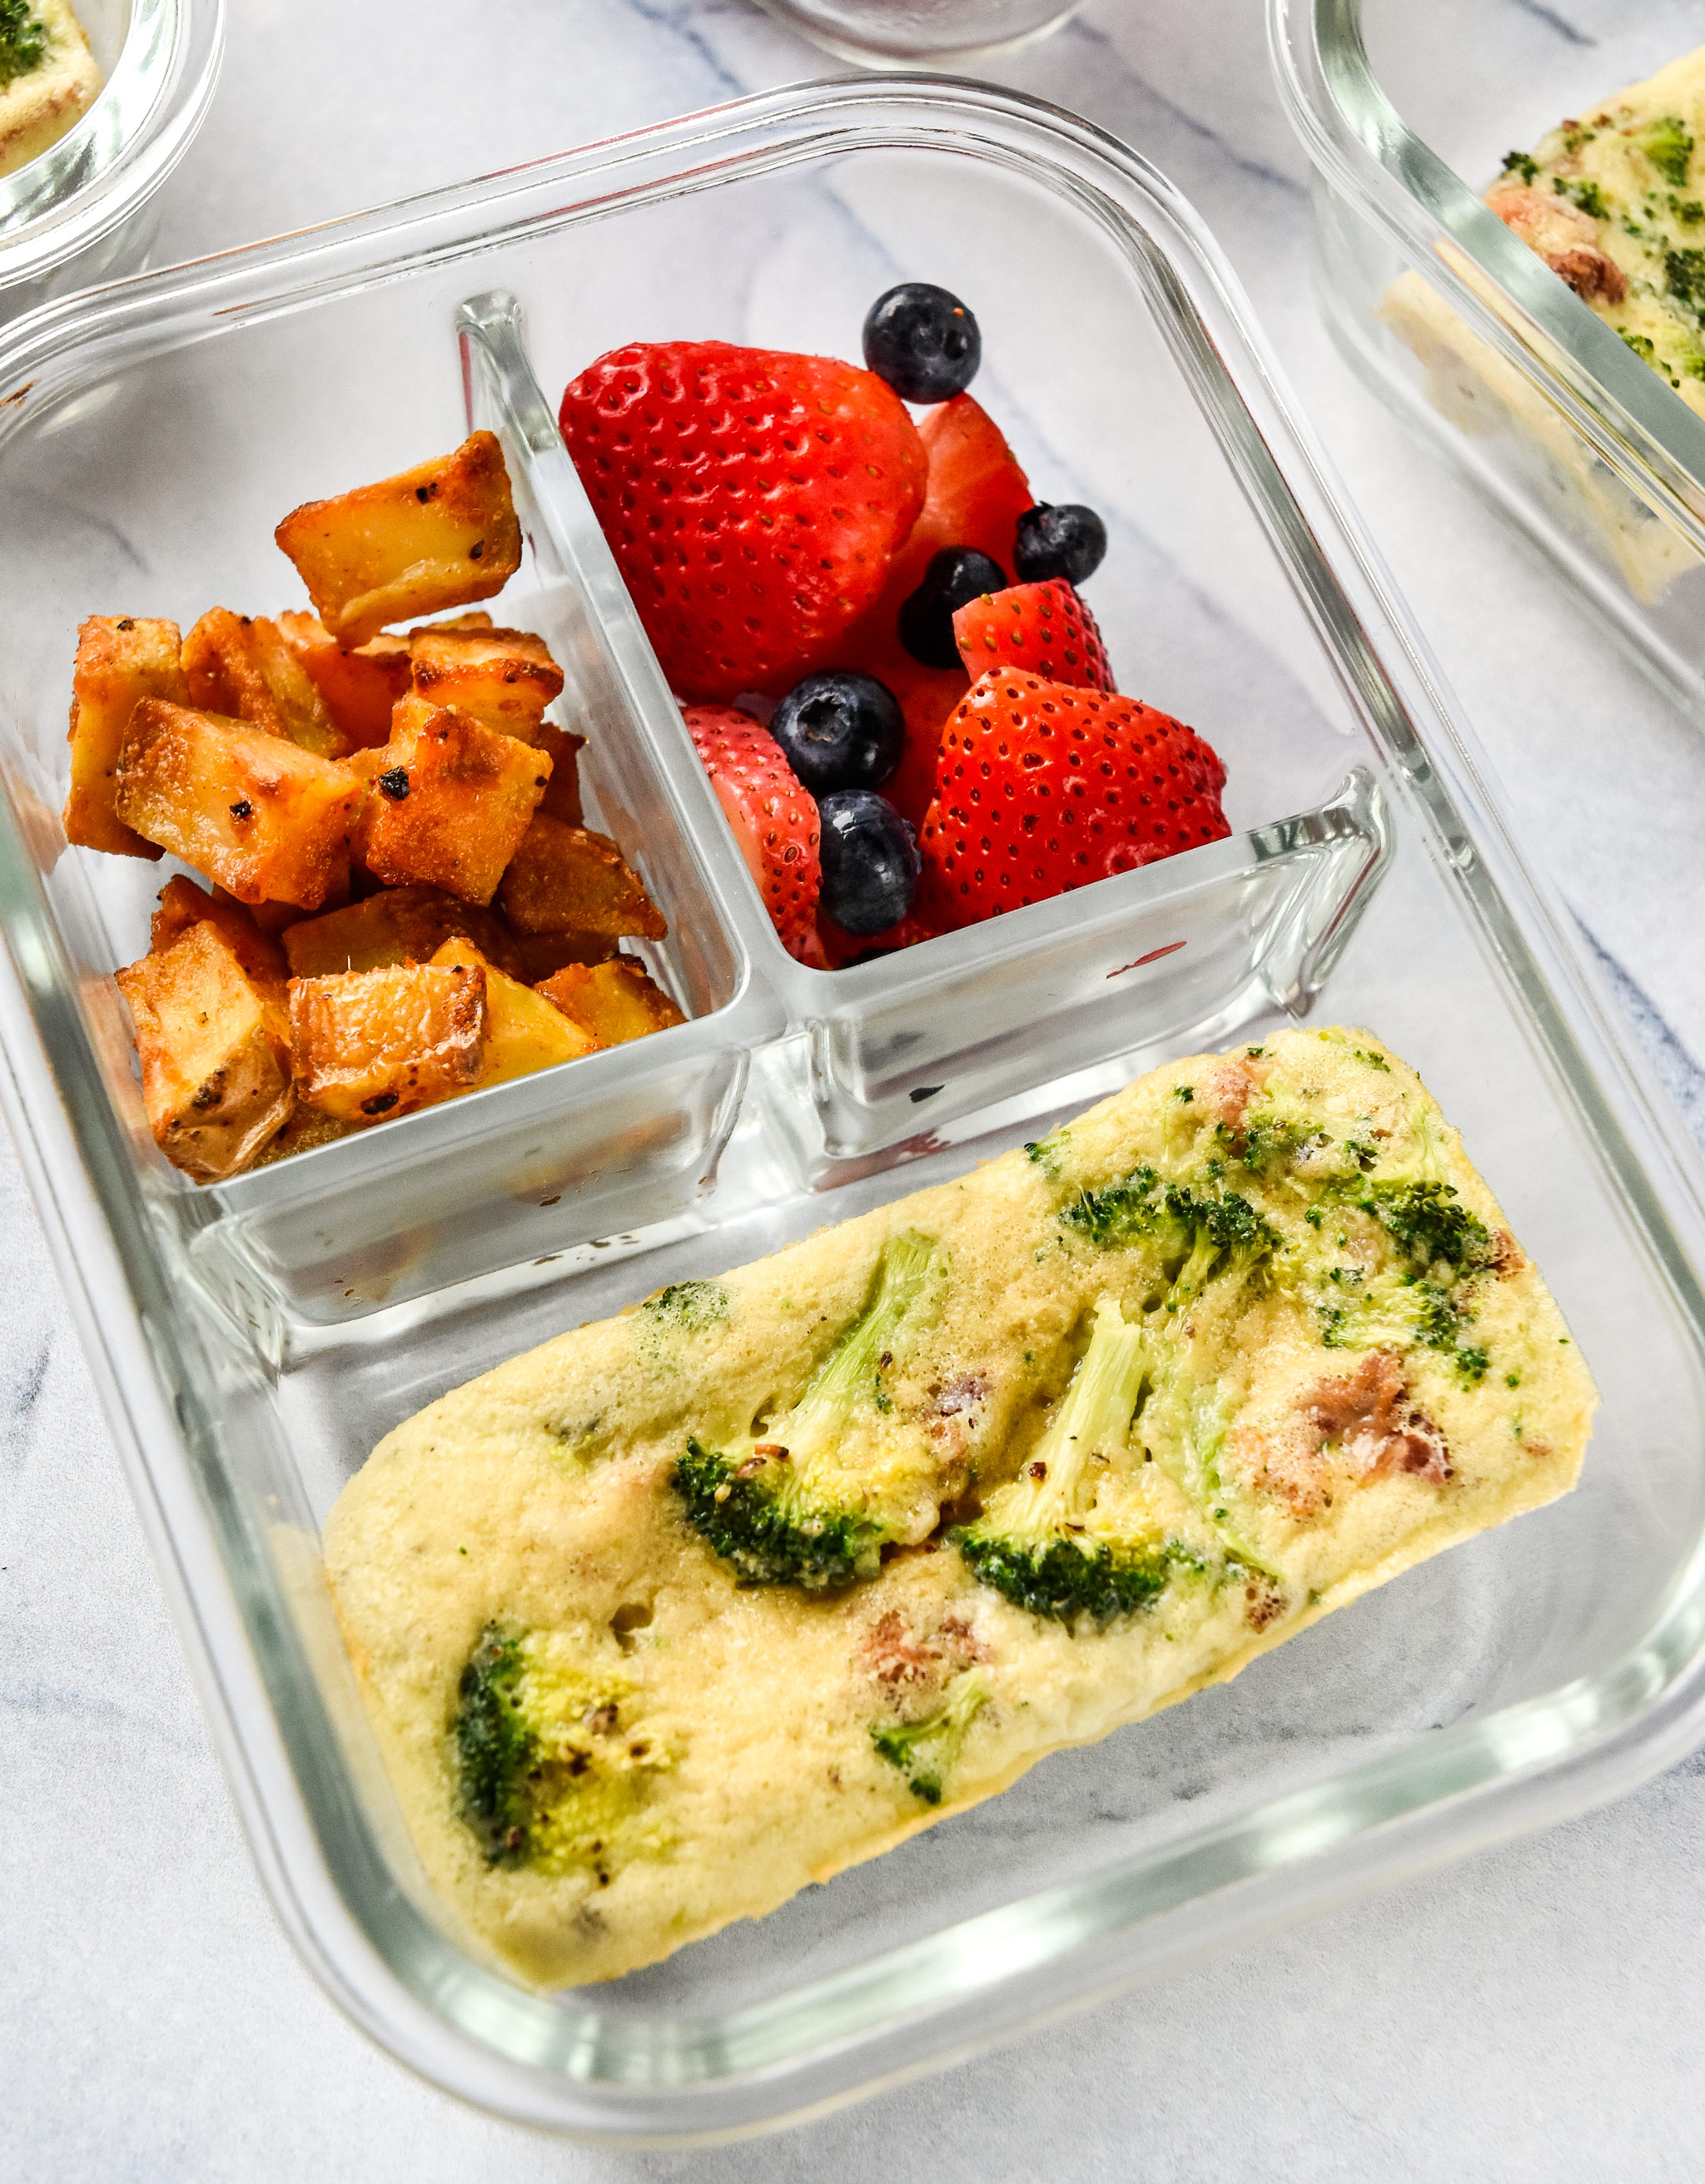 Broccoli bacon mini frittata in a meal prep container with potatoes and berries